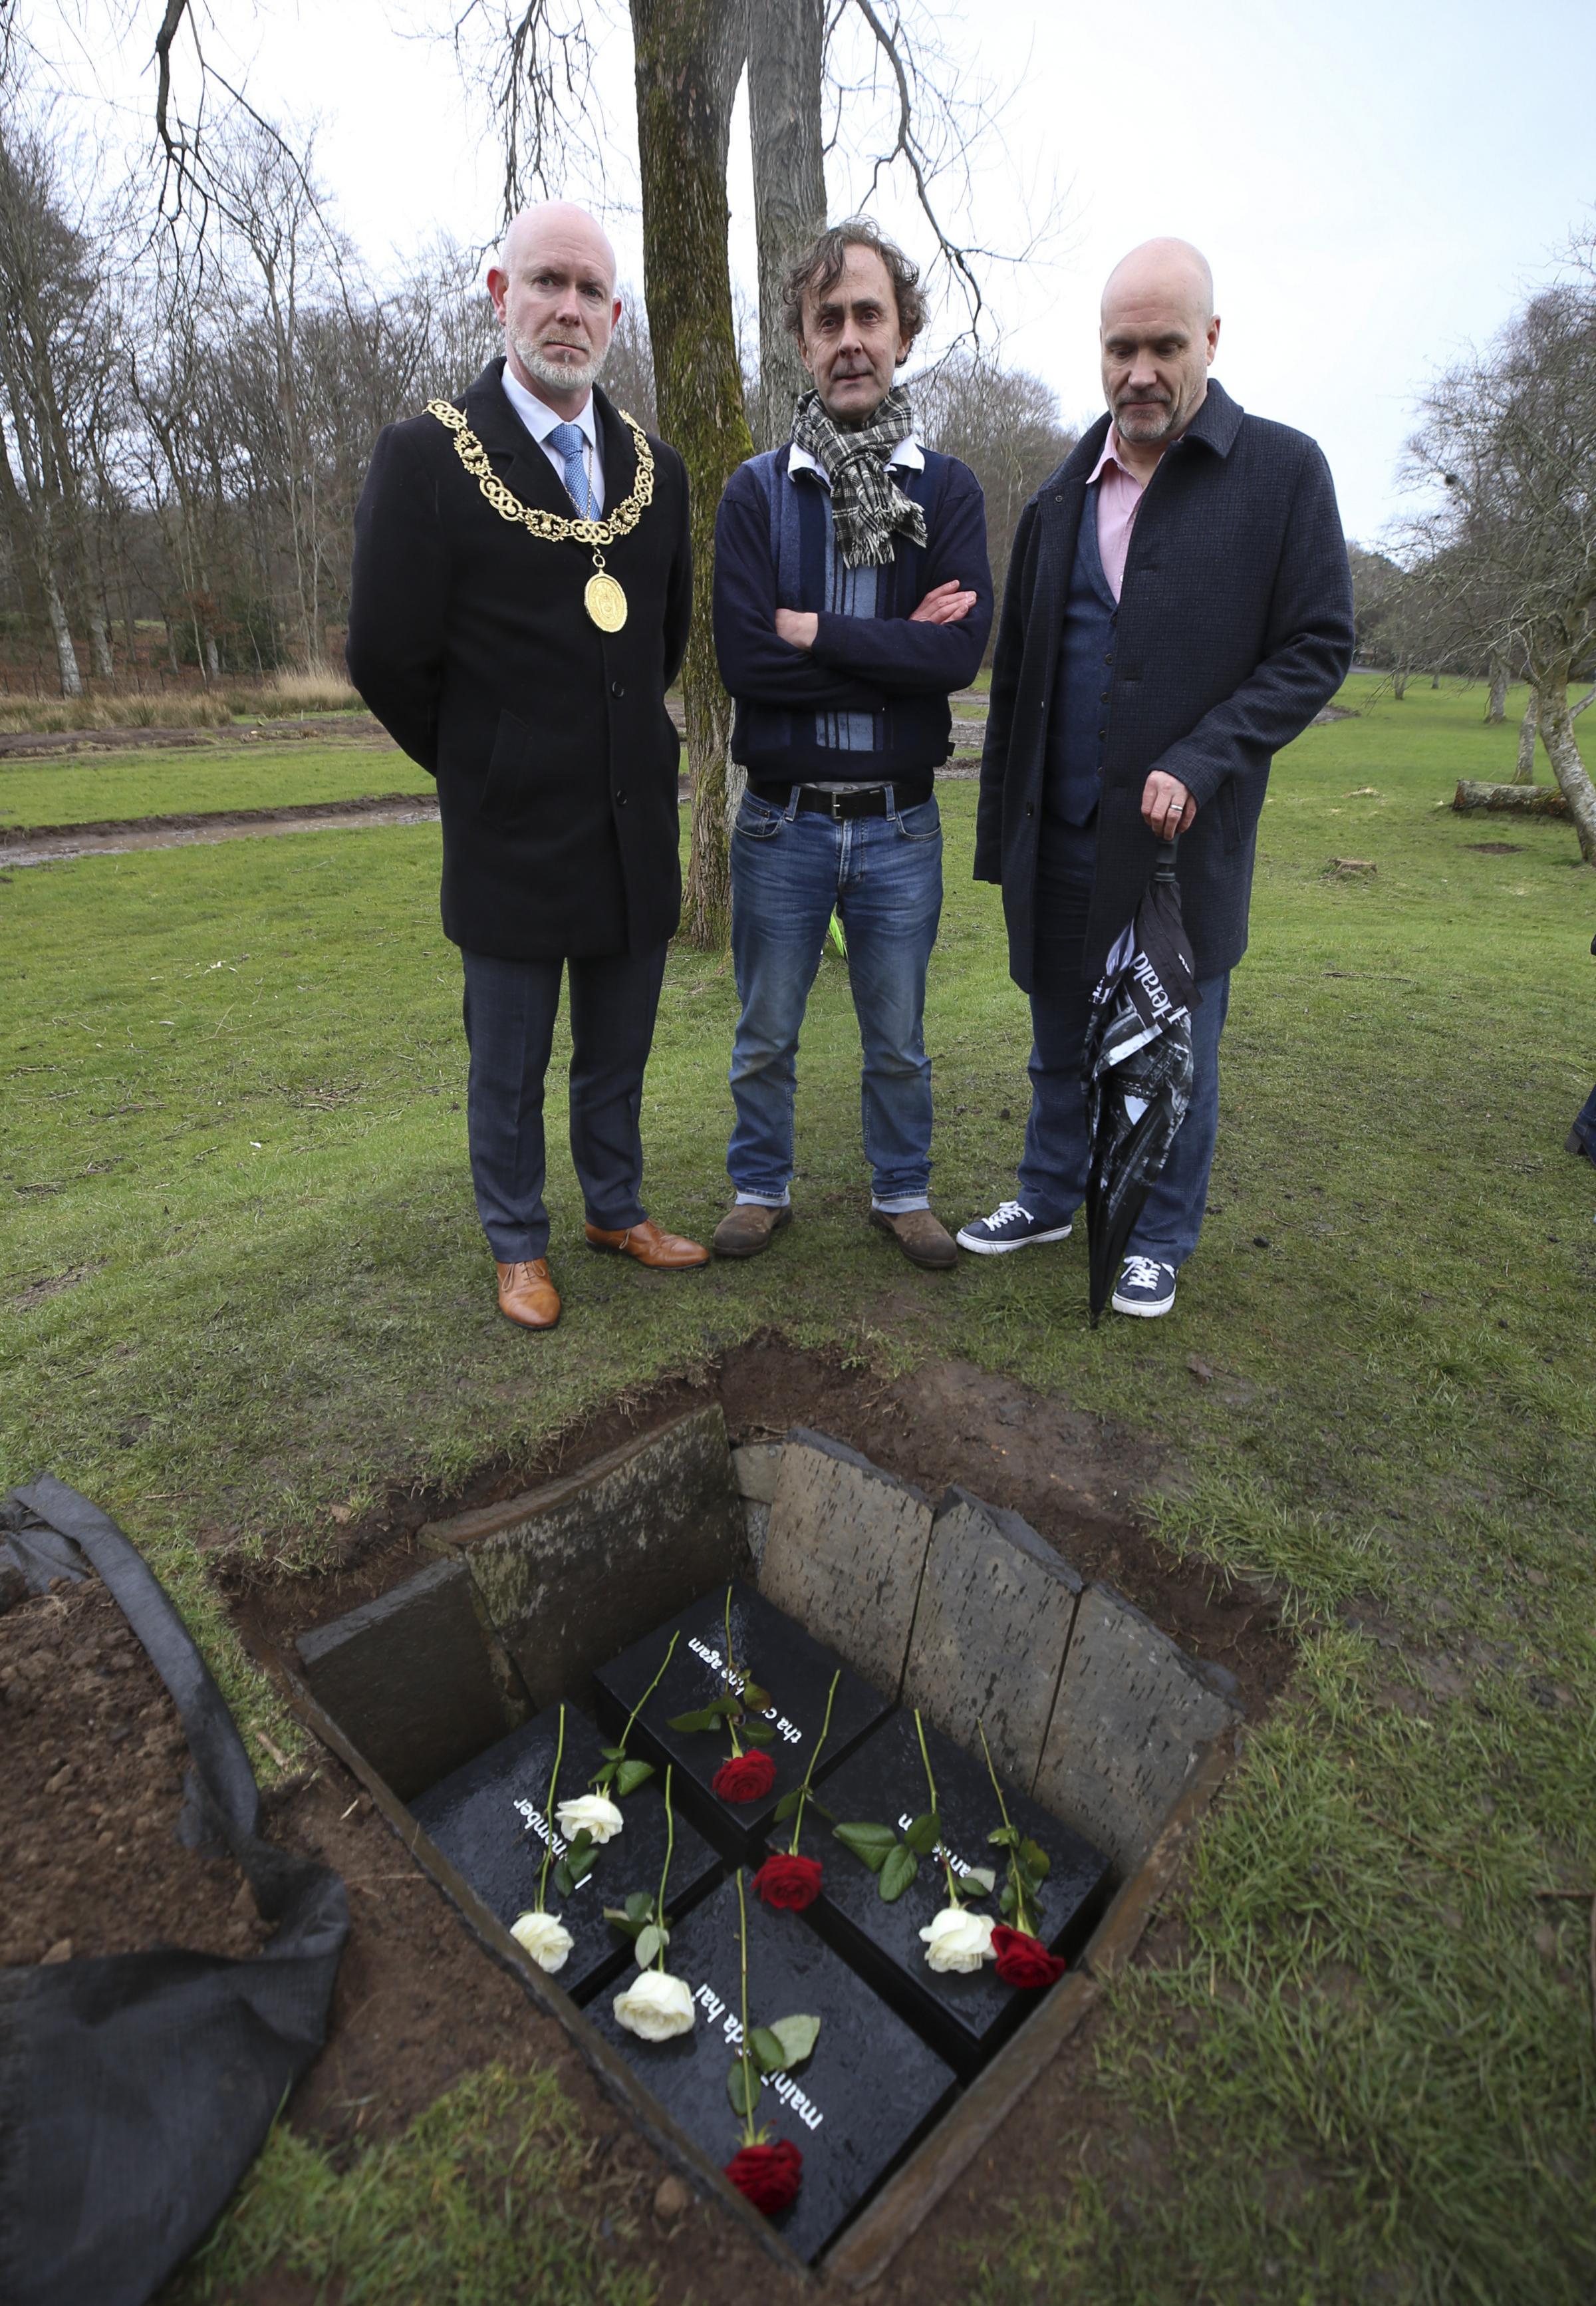 Boxes with I remember messages buried in Pollok Country Park. From left, Lord Provost of Glasgow Philip Braat, artist Alec Finlay and Donald Martin, editor of The Herald. Photo by Gordon Terris.